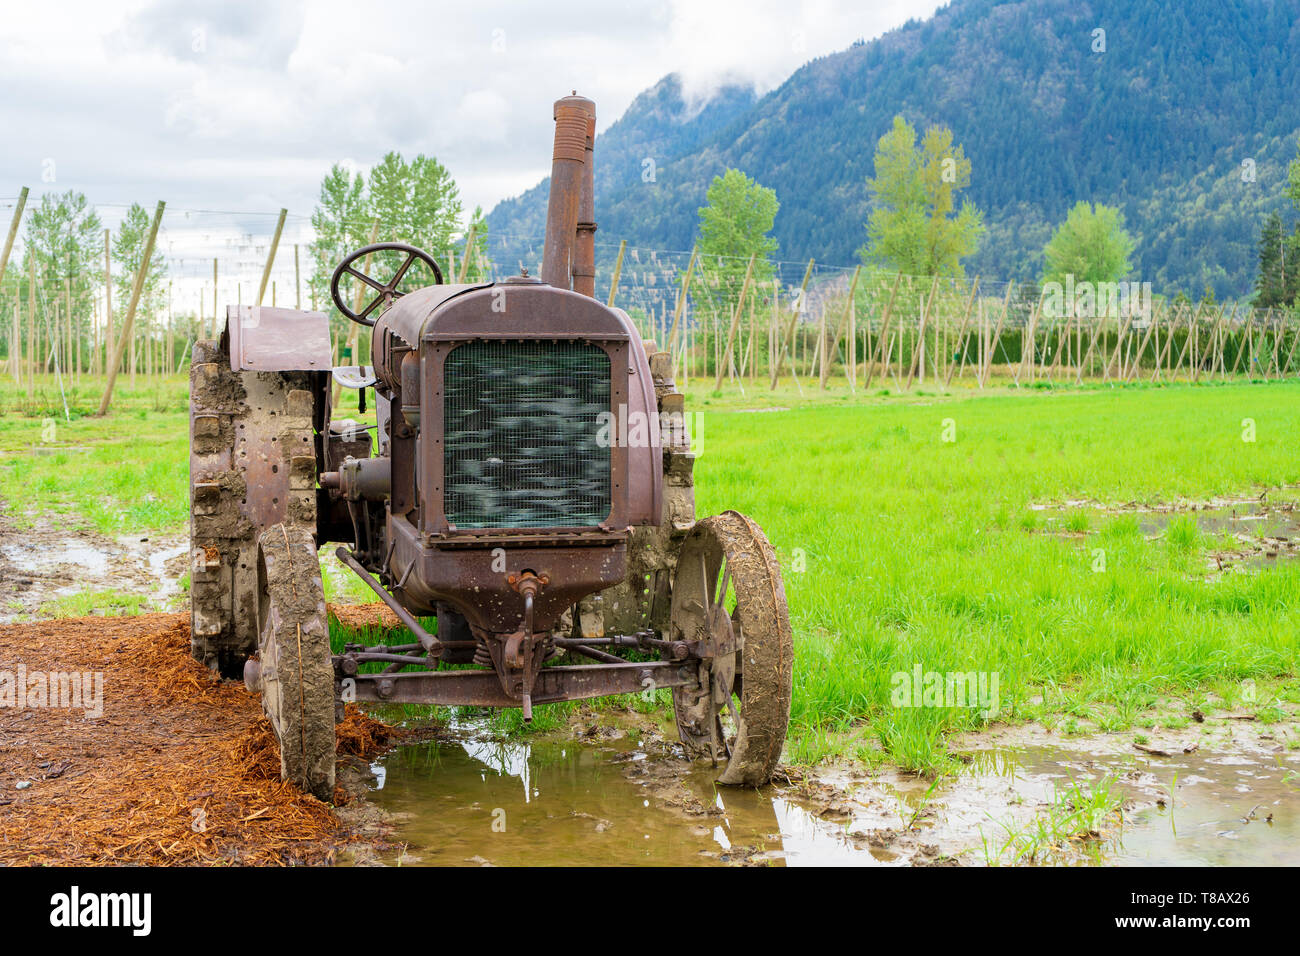 Antiquated rusty tractor on a real farm with historical engineering design of farm equipment from days old. Stock Photo